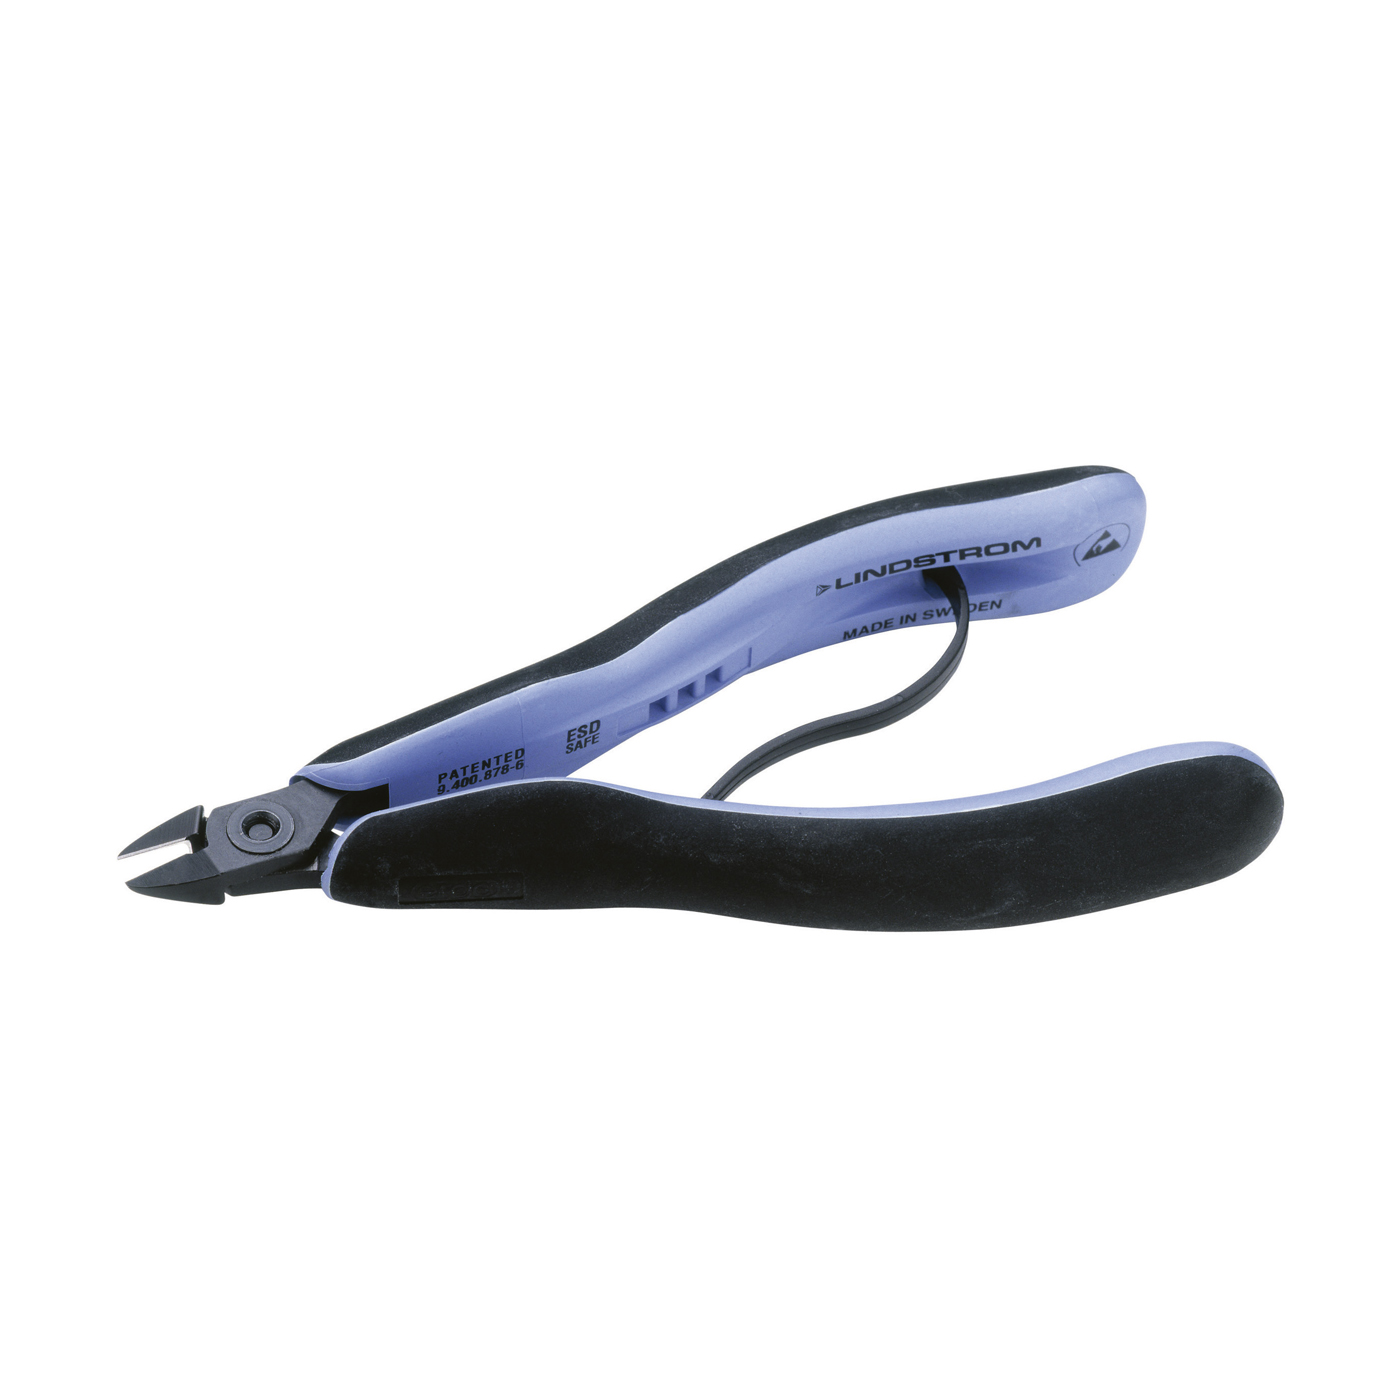 Rx8140 Wire Cutter, Micro-Bevel, Oval, 135.5 mm - 1 piece